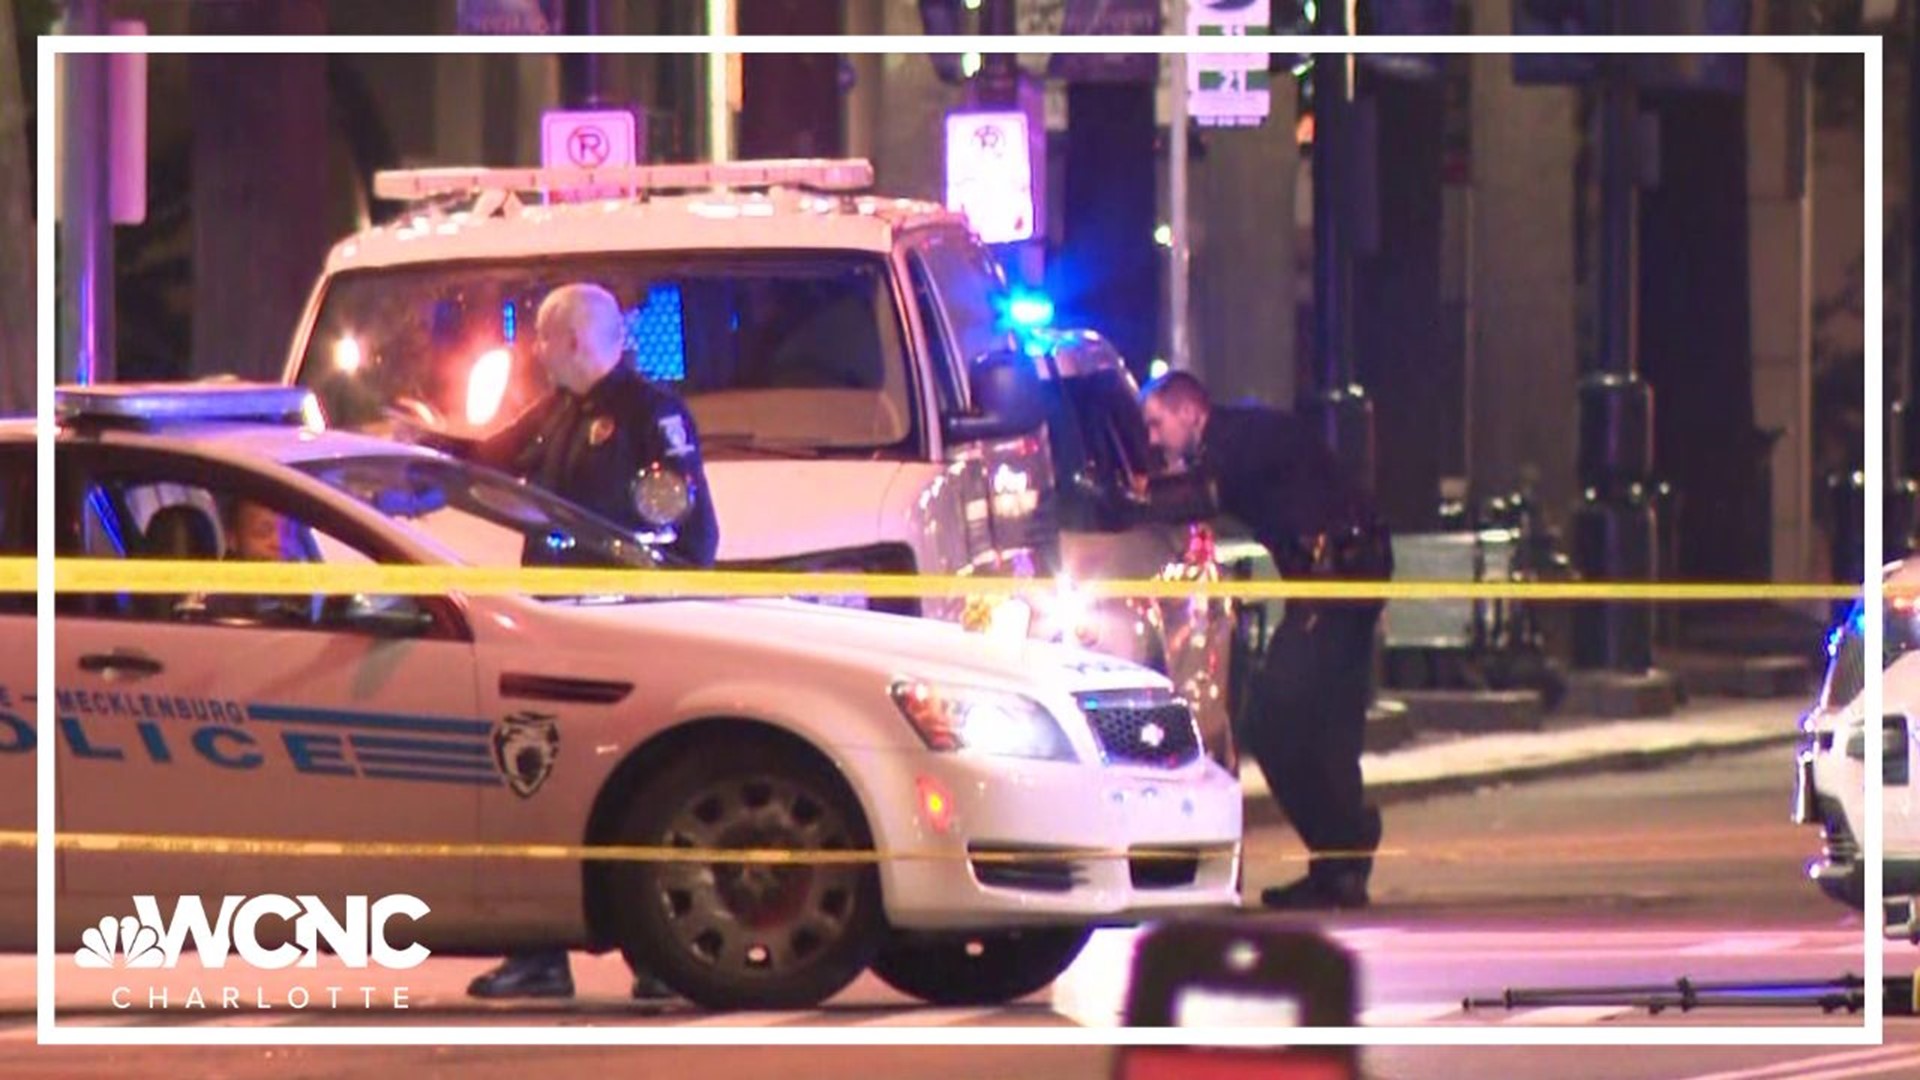 Four people were taken to the hospital after a shooting along North Tryon Street in Uptown early Monday morning, police said.